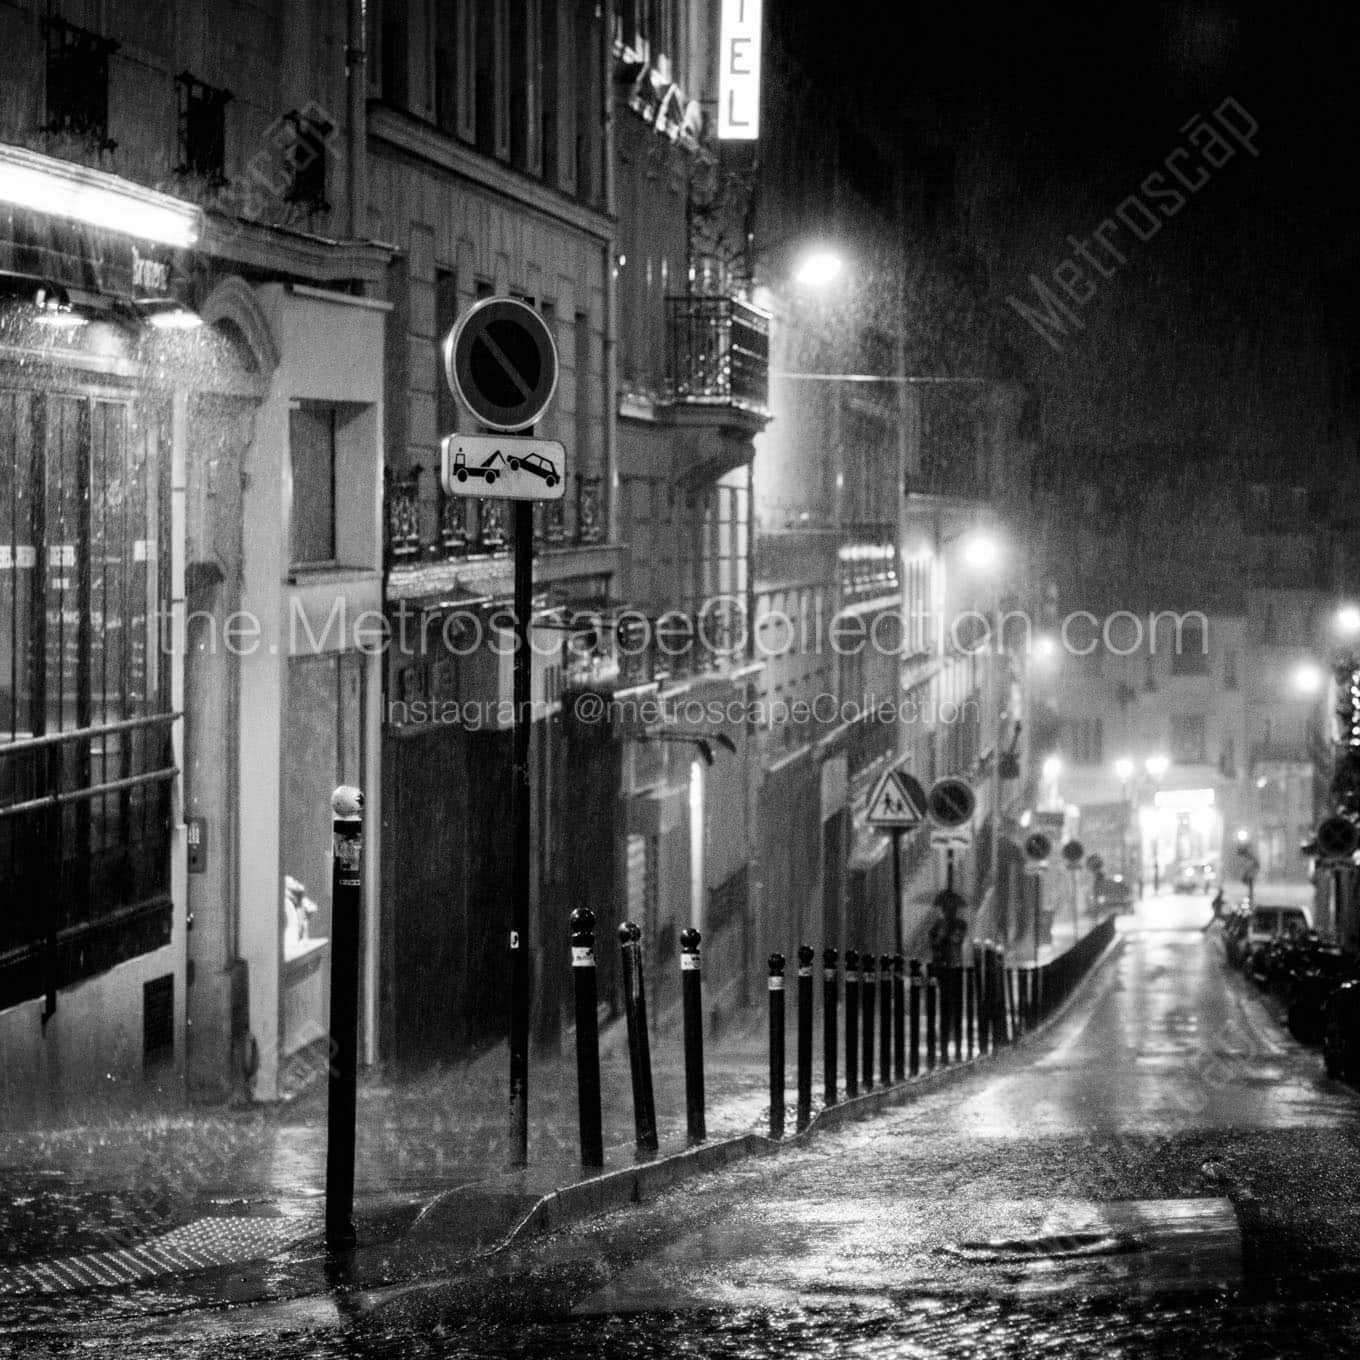 rue abbesses in pouring rain at night Black & White Wall Art